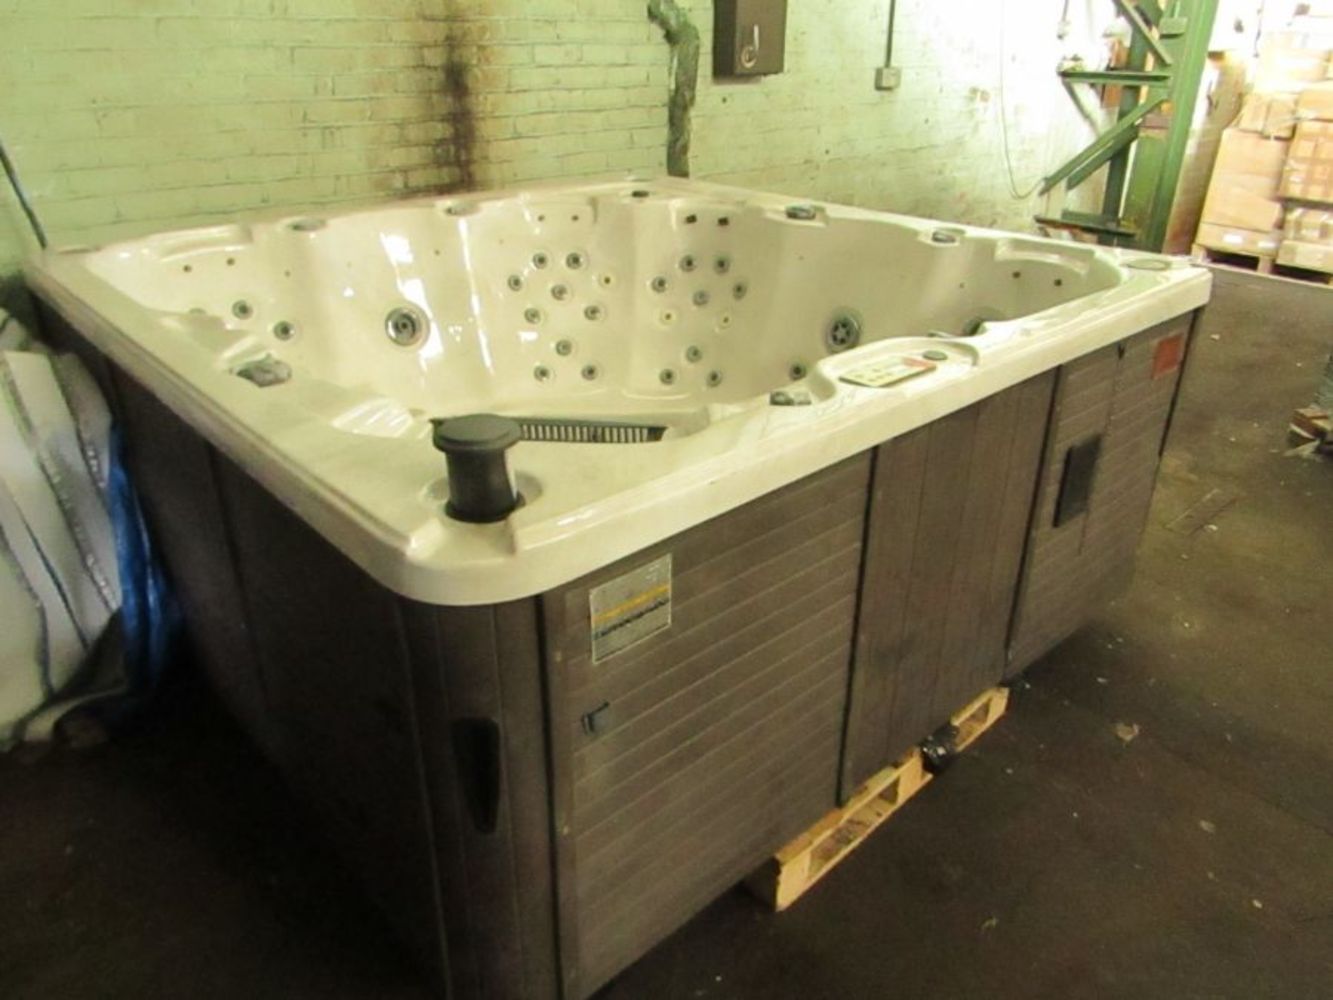 Canadian Spa 6 Person Hot Tub, Limited Time 10% Buyers Premium!!!!